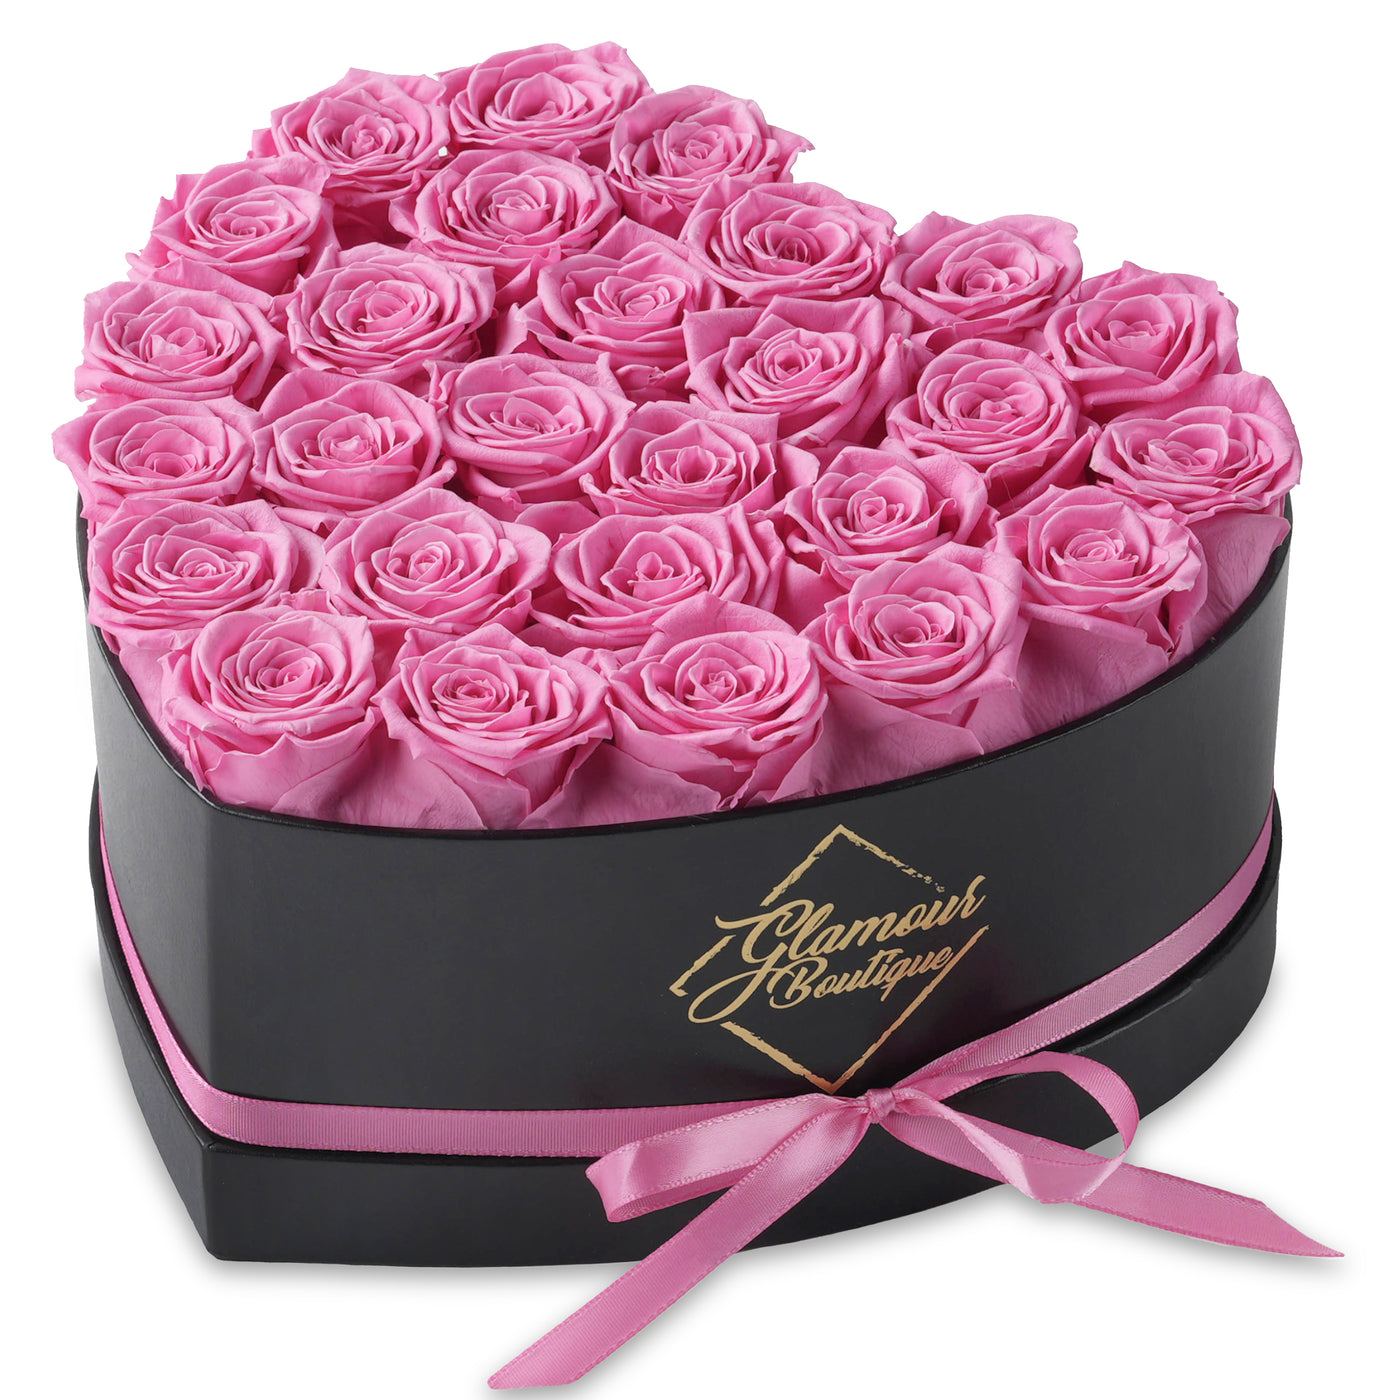 27-Piece Forever Flowers Heart Shape Box - Handmade Real Preserved Roses - Pink